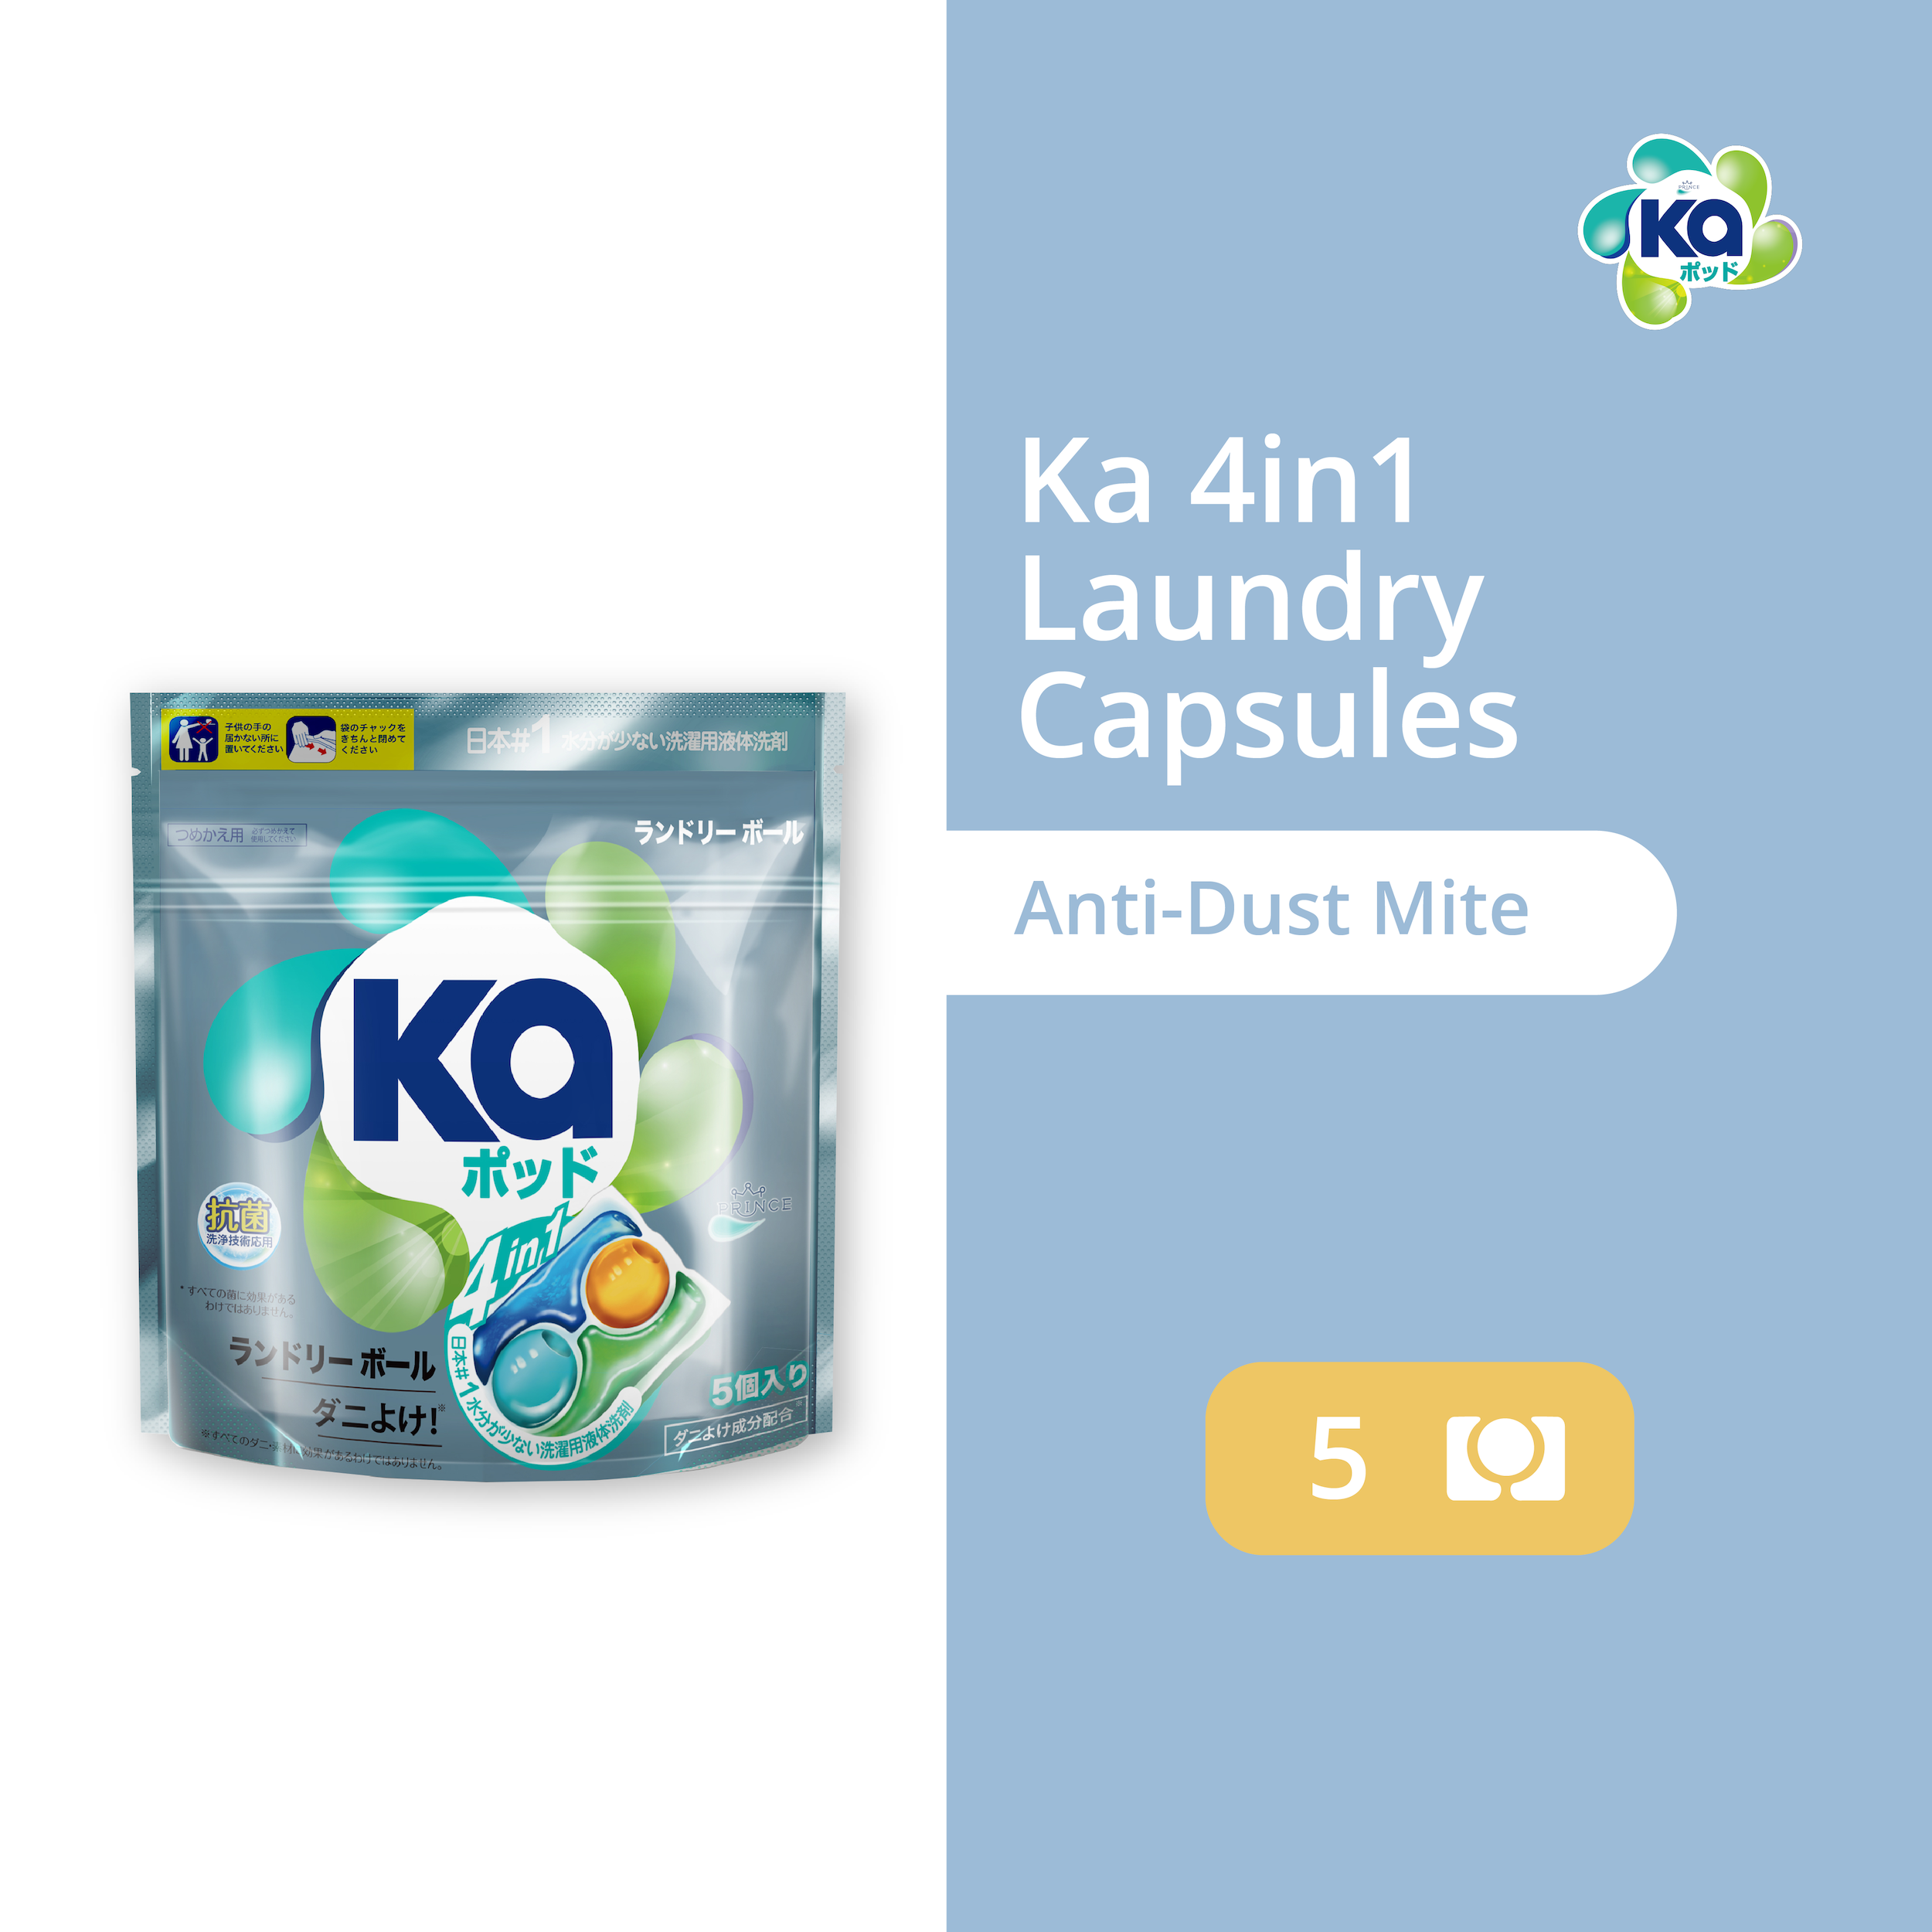 Ka 4in1 Laundry Capsules 5 Pods – Anti-Dust Mite